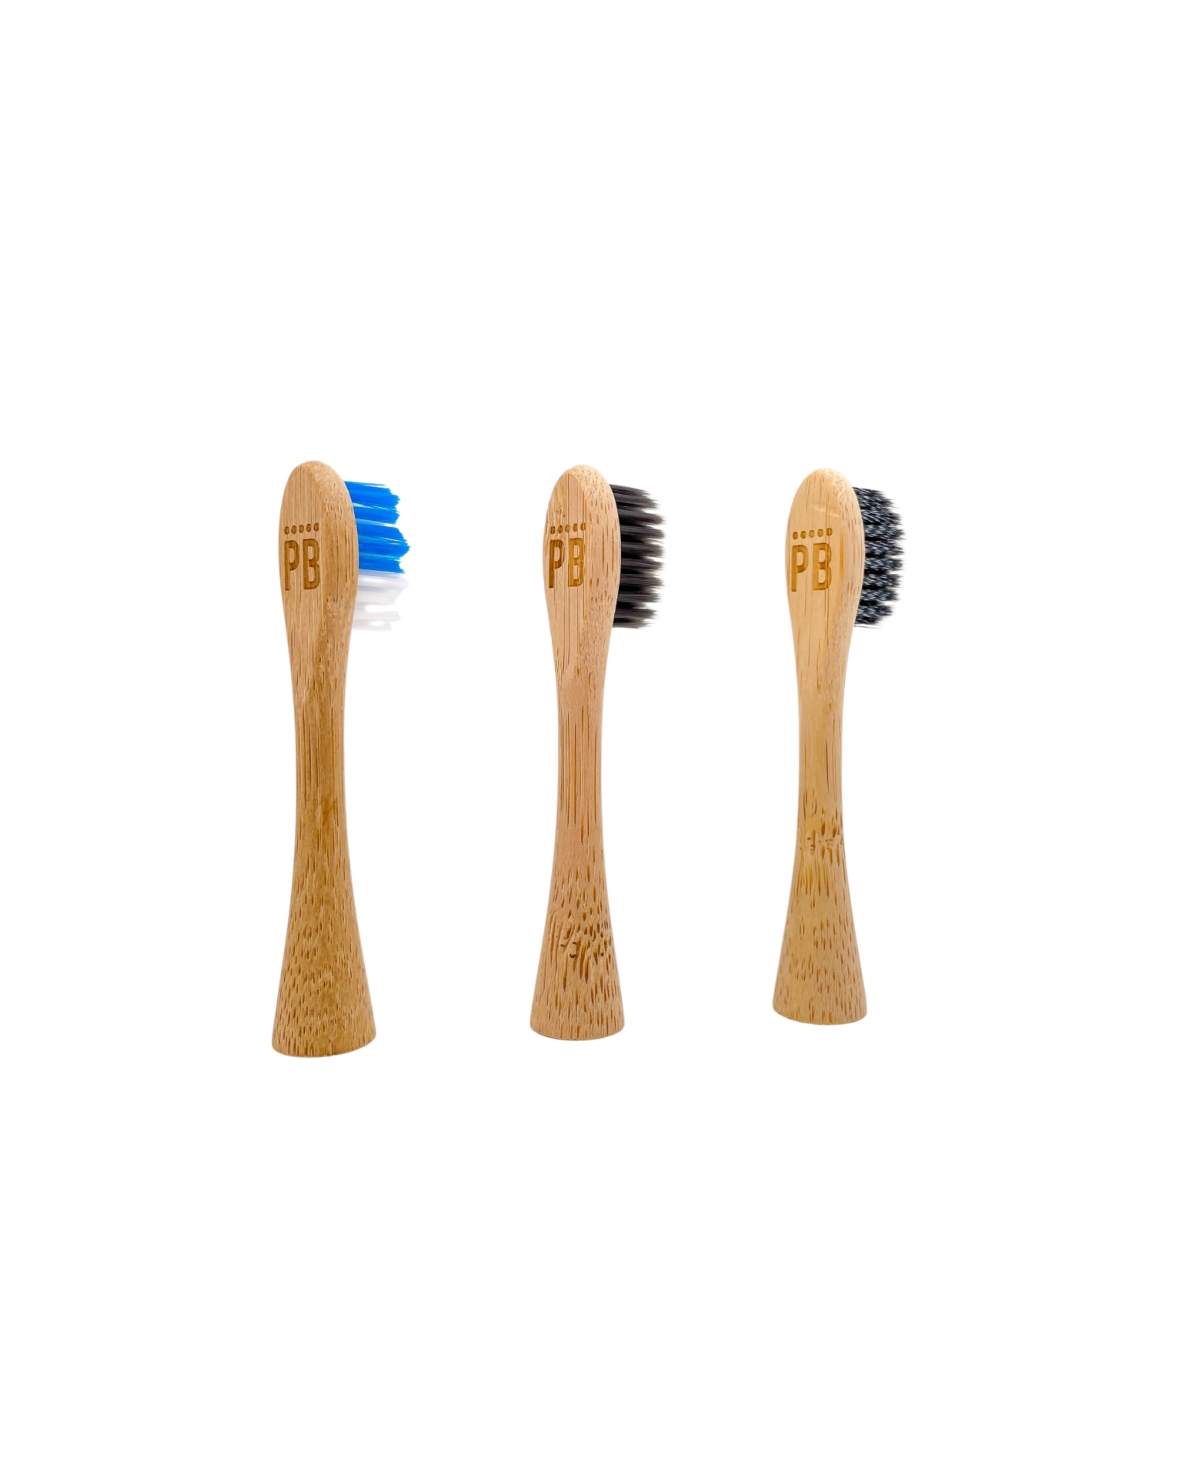 Three Bamboo Electric Toothbrush Heads for PearlBar Sonic Electric Toothbrush, Set of 3